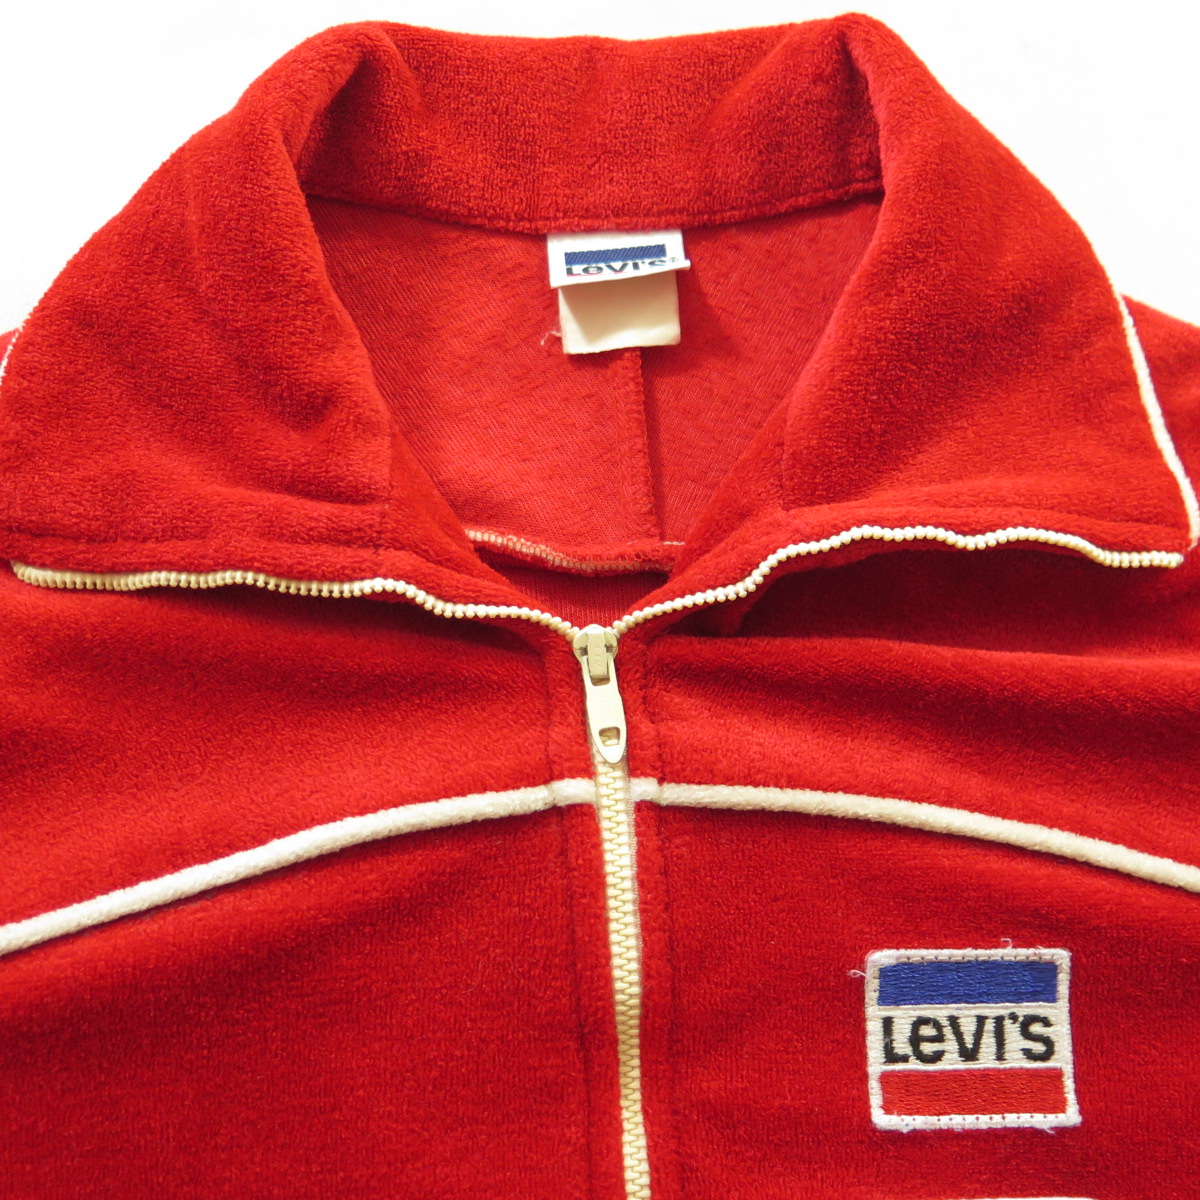 Vintage 80s Levis USA Team Track Jacket Mens Medium patches Red Terry ...